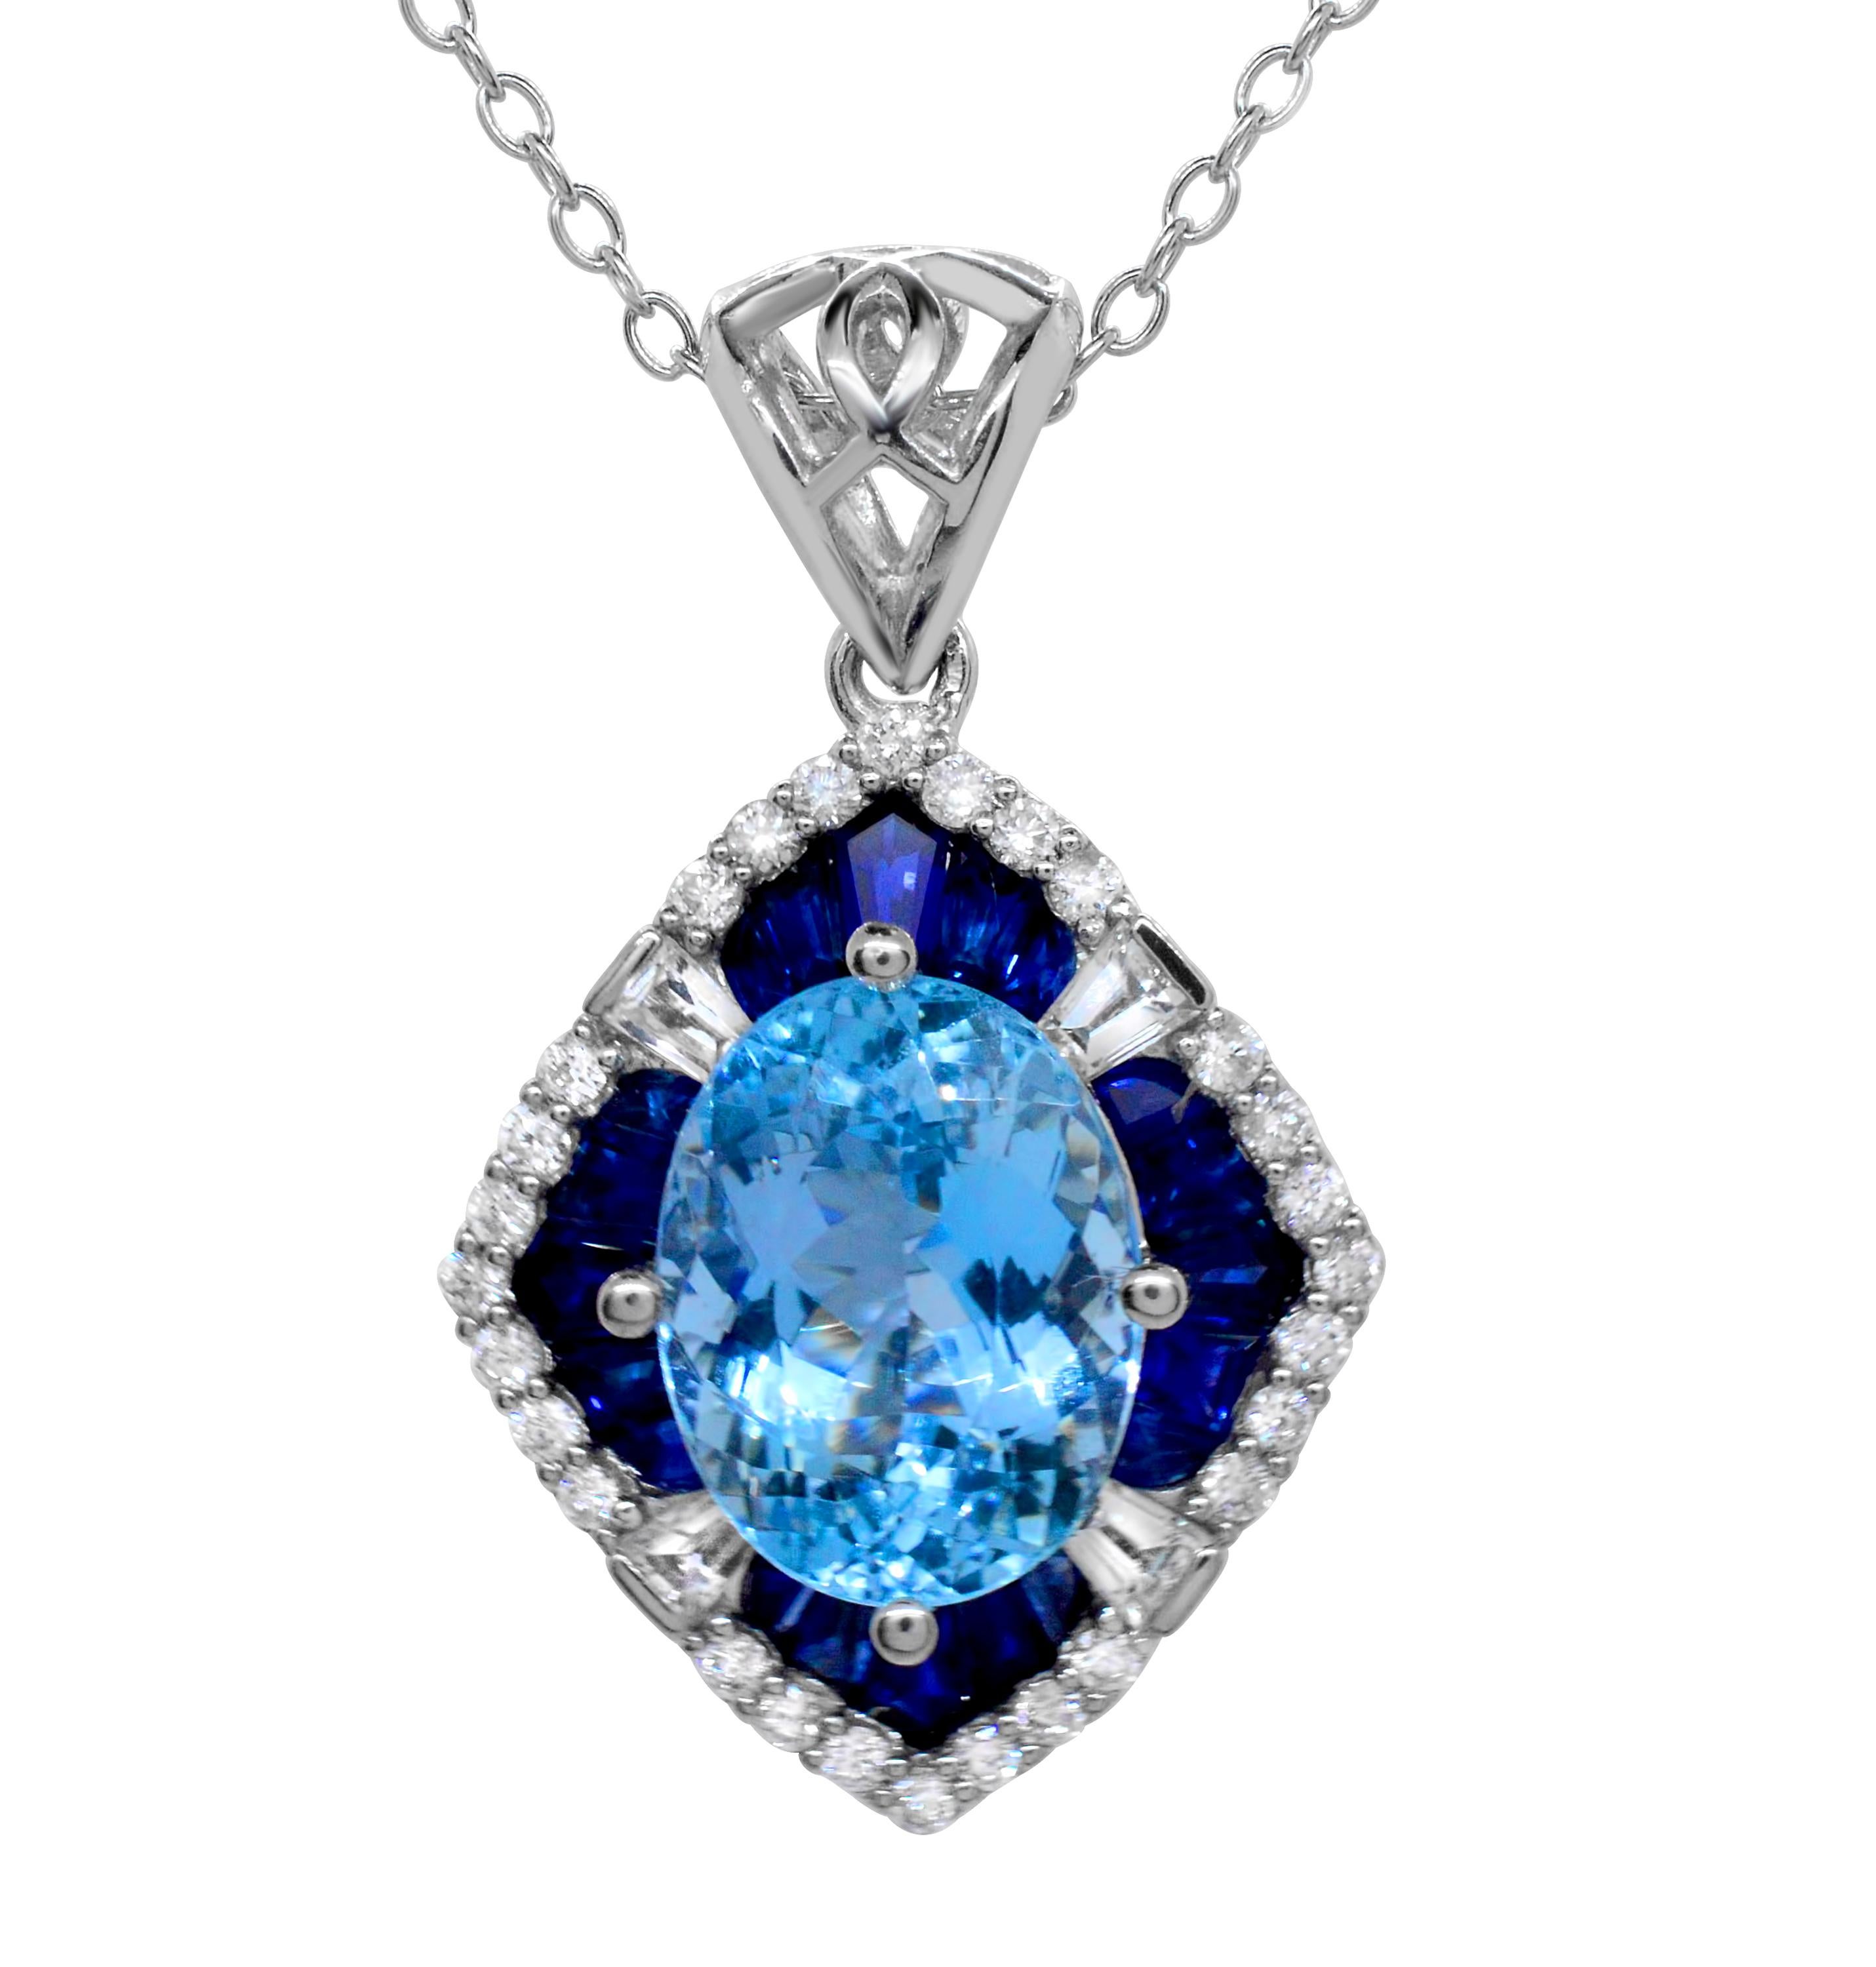 A stunning 10 x 8 mm Oval Aquamarine Scalloped White Gold Pendant.  The center aqua weighs 2.49 carats.  The hand-set blue and white sapphires that frame the center, are of varying sizes and weigh a total of 2.29 carats.  This piece has a total